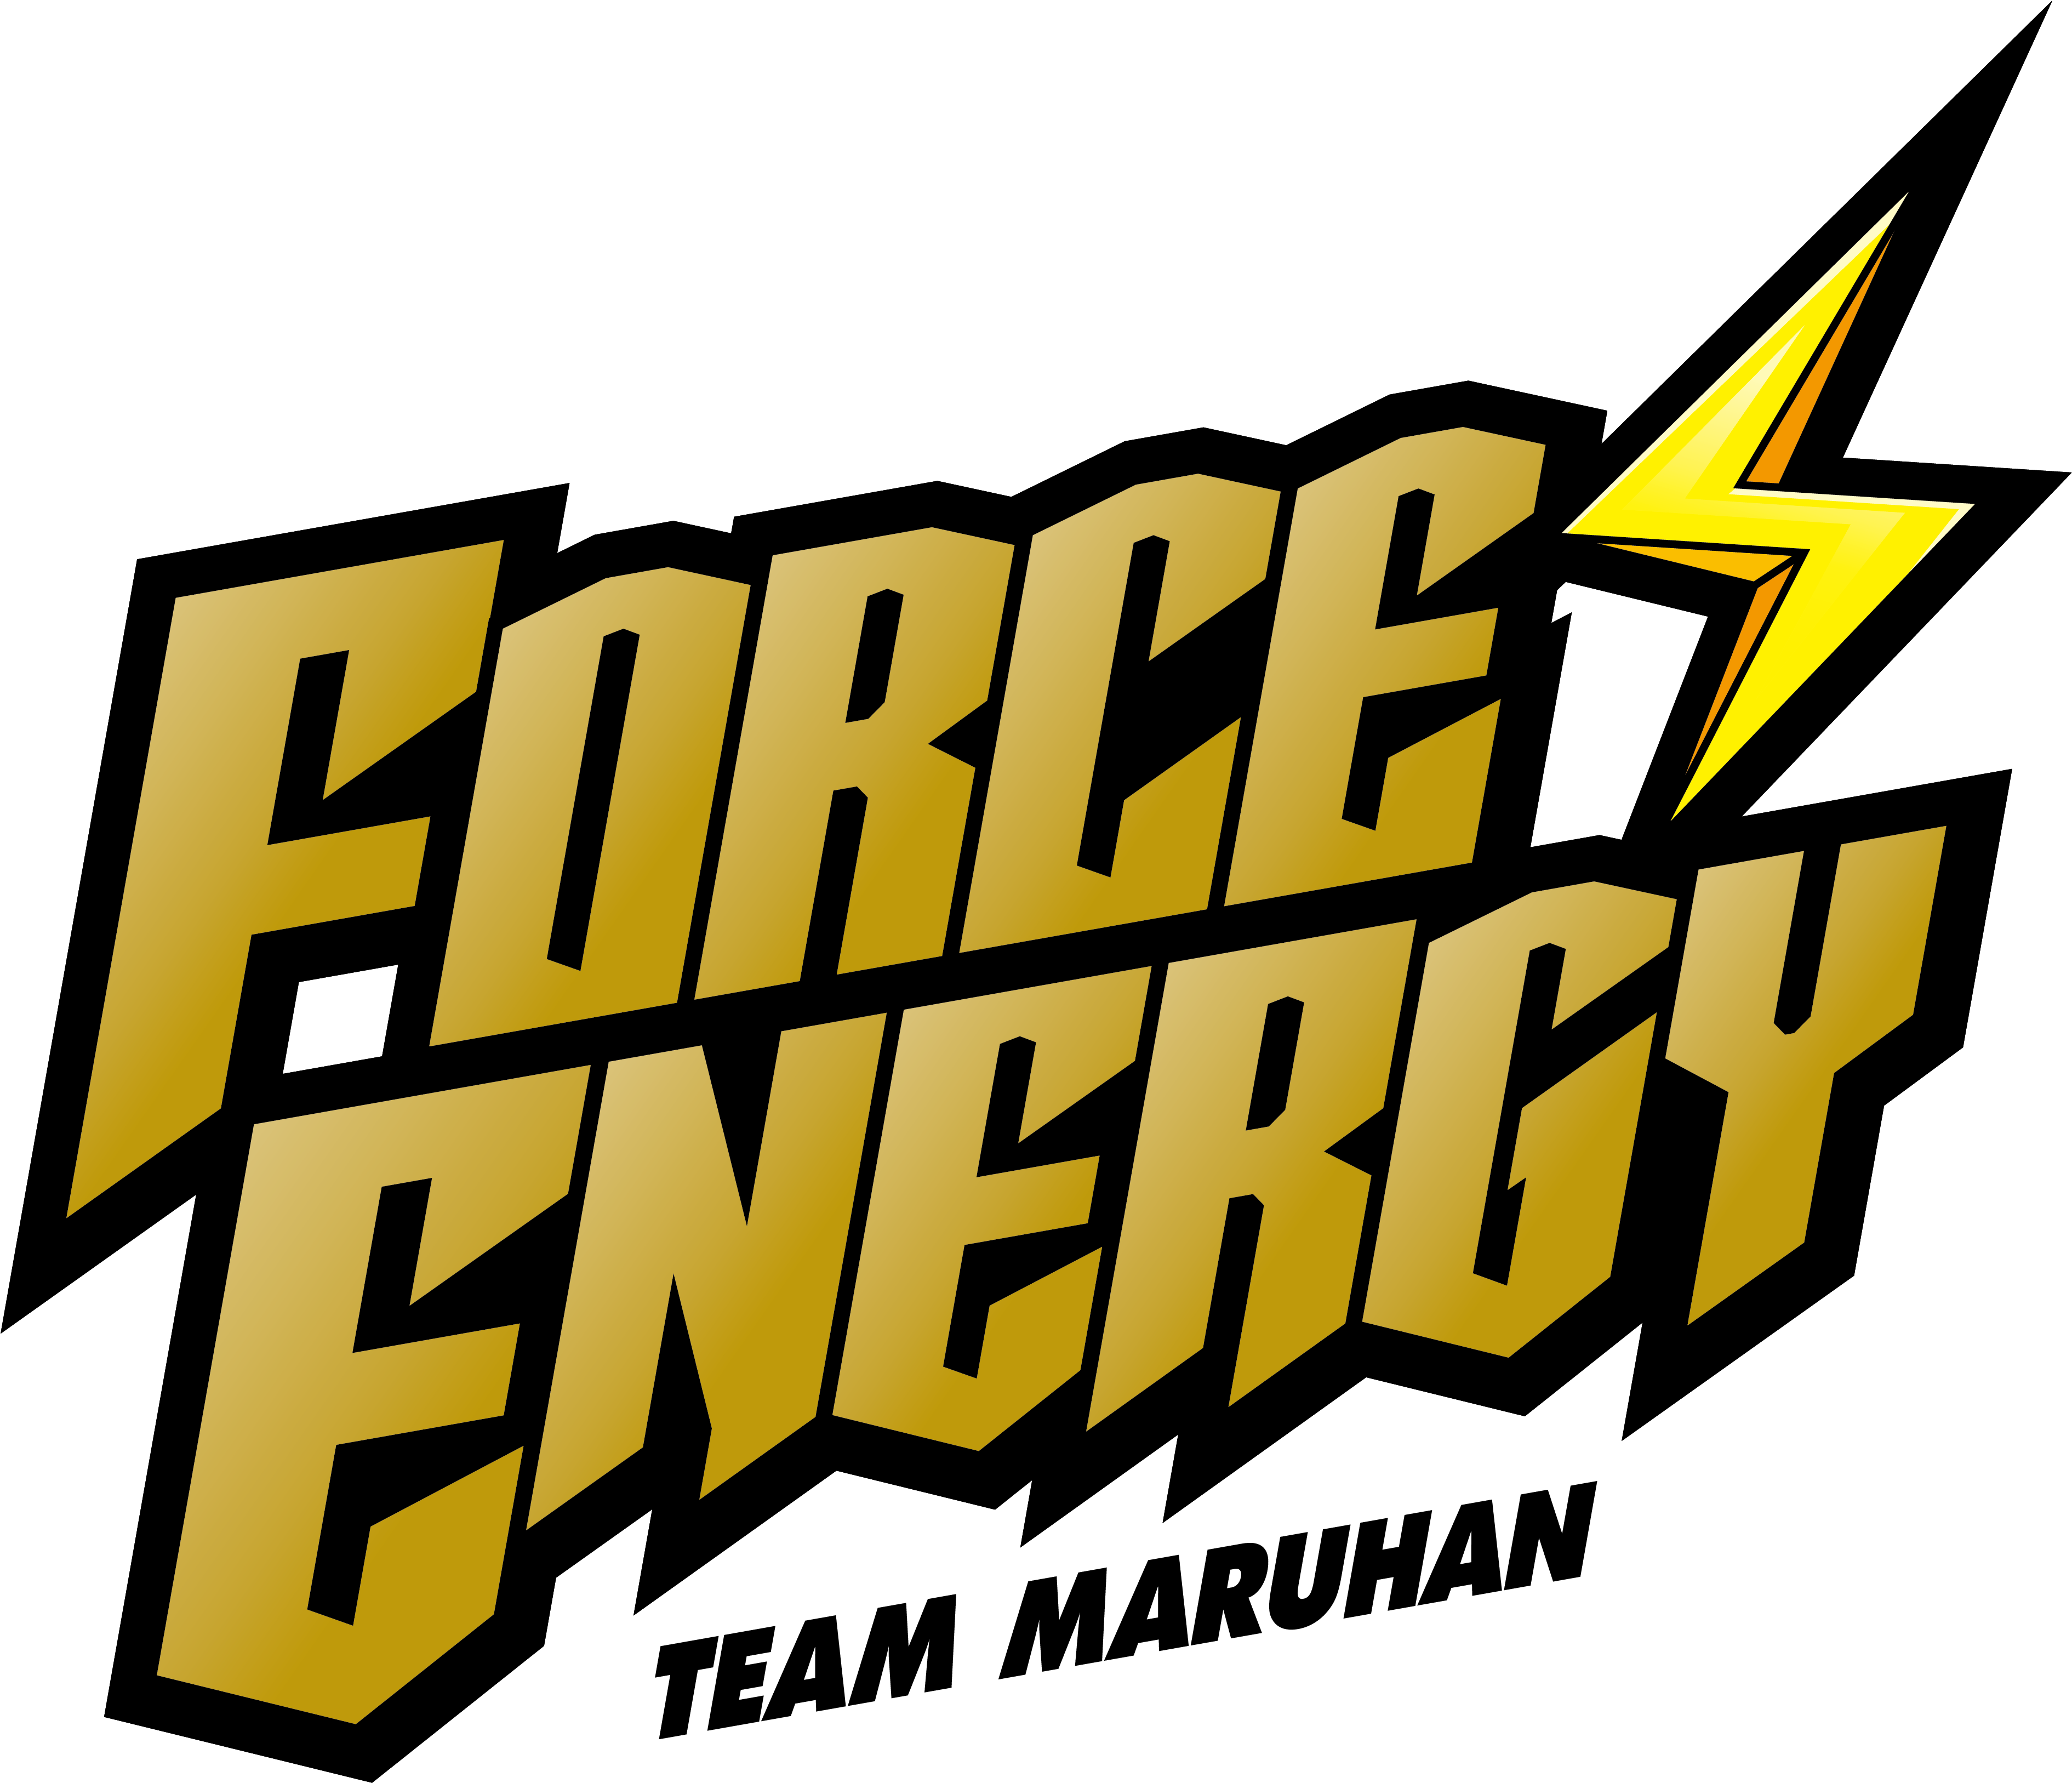 force_energy_logo.png